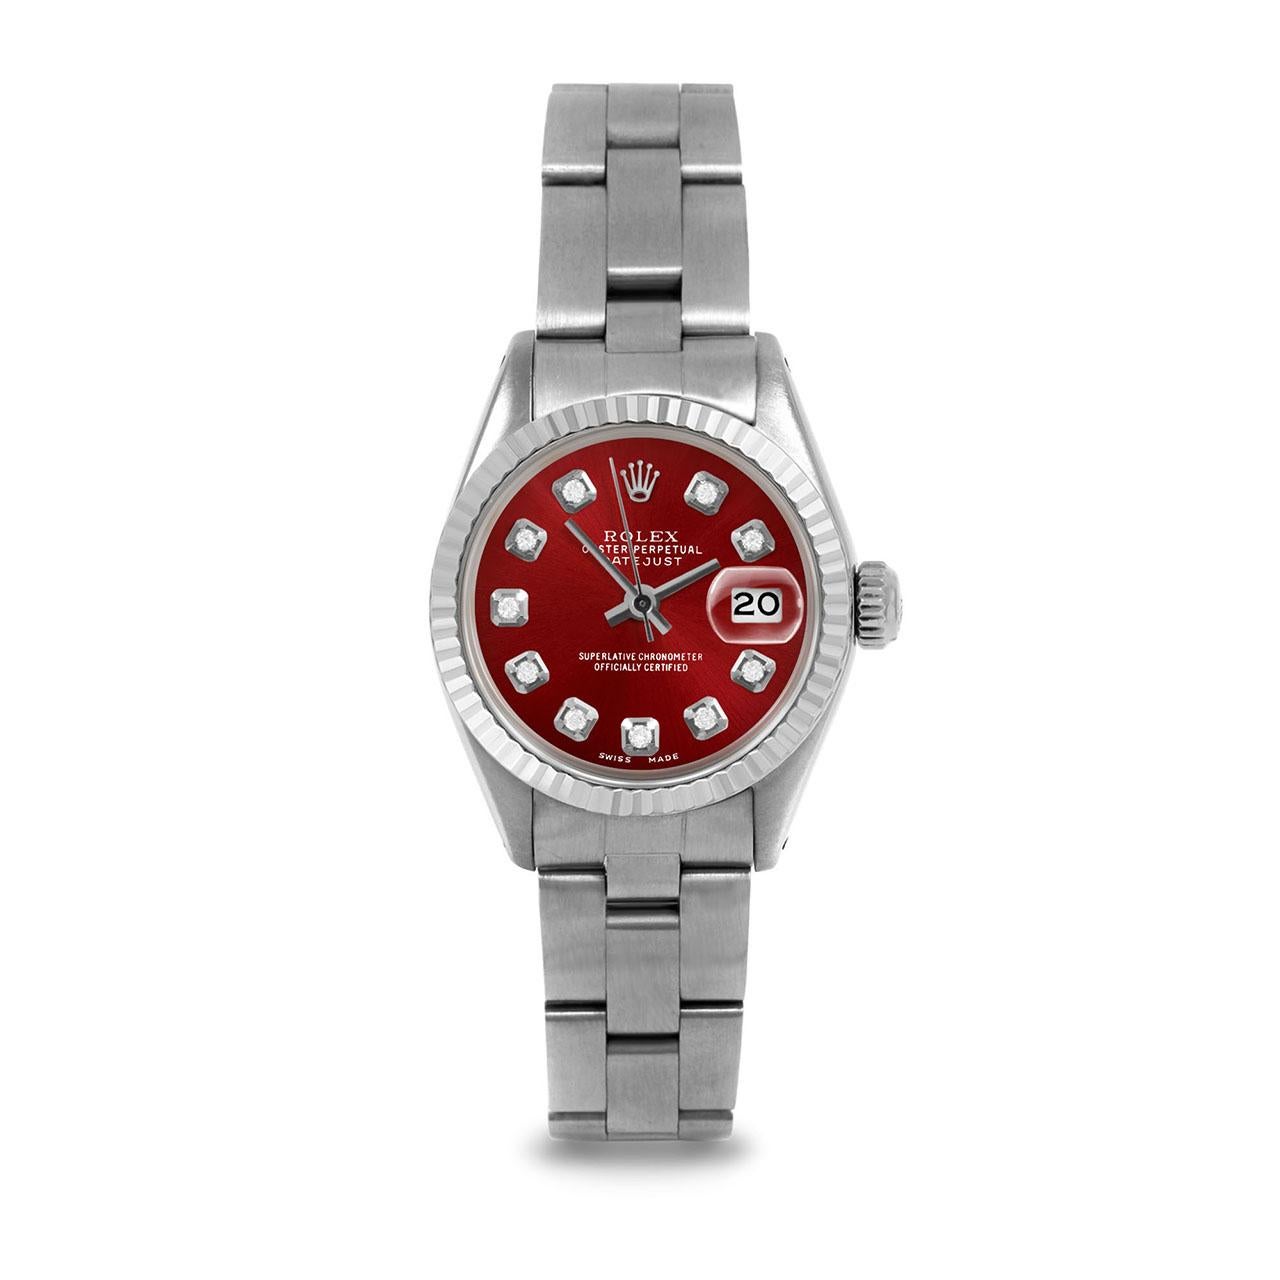 Pre-Owned Rolex 6917 Ladies 26mm Datejust Watch, Custom Red Diamond Dial & Fluted Bezel on Rolex Stainless Steel Oyster Band.   

SKU 6917-SS-RED-DIA-AM-FLT-OYS


Brand/Model:        Rolex Datejust
Model Number:        6917
Style:        Ladies
Case